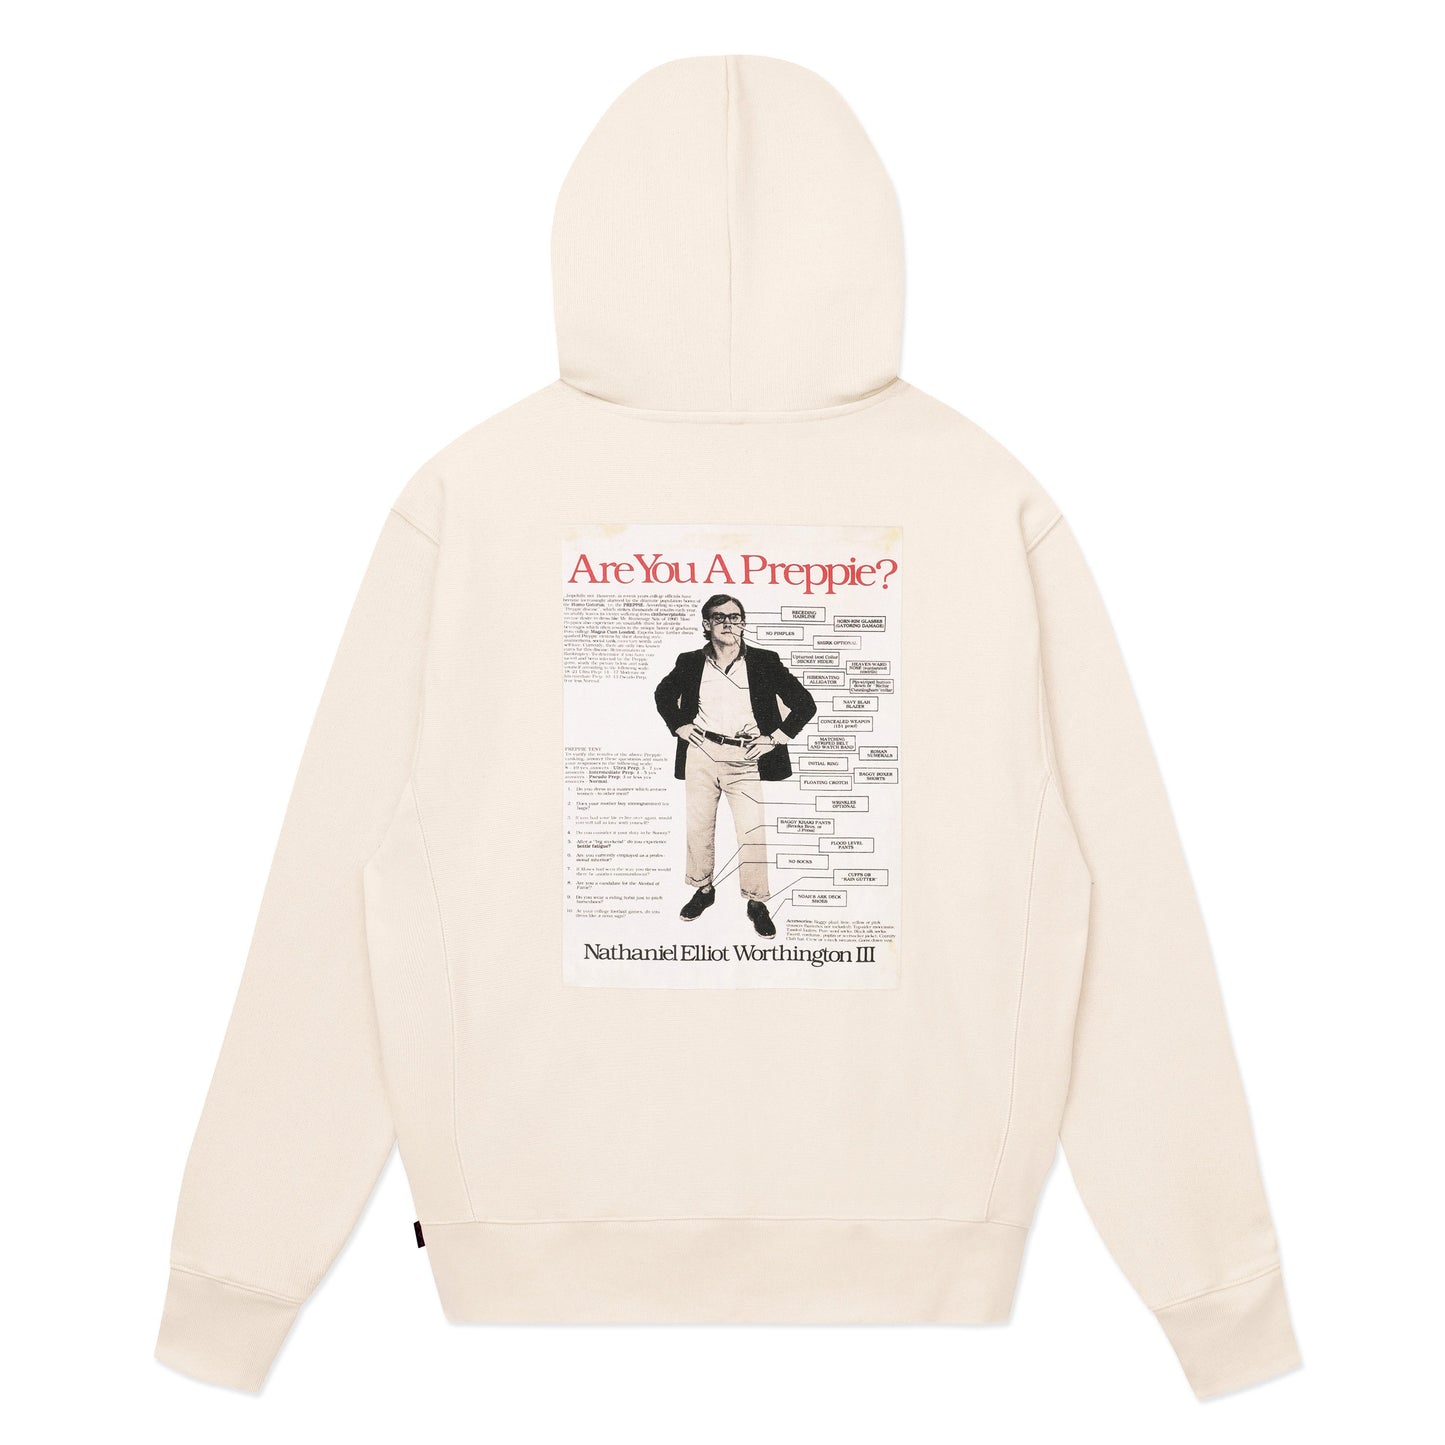 Back of cream hoodie, screenprinted with the "Are You a Preppie?" poster.